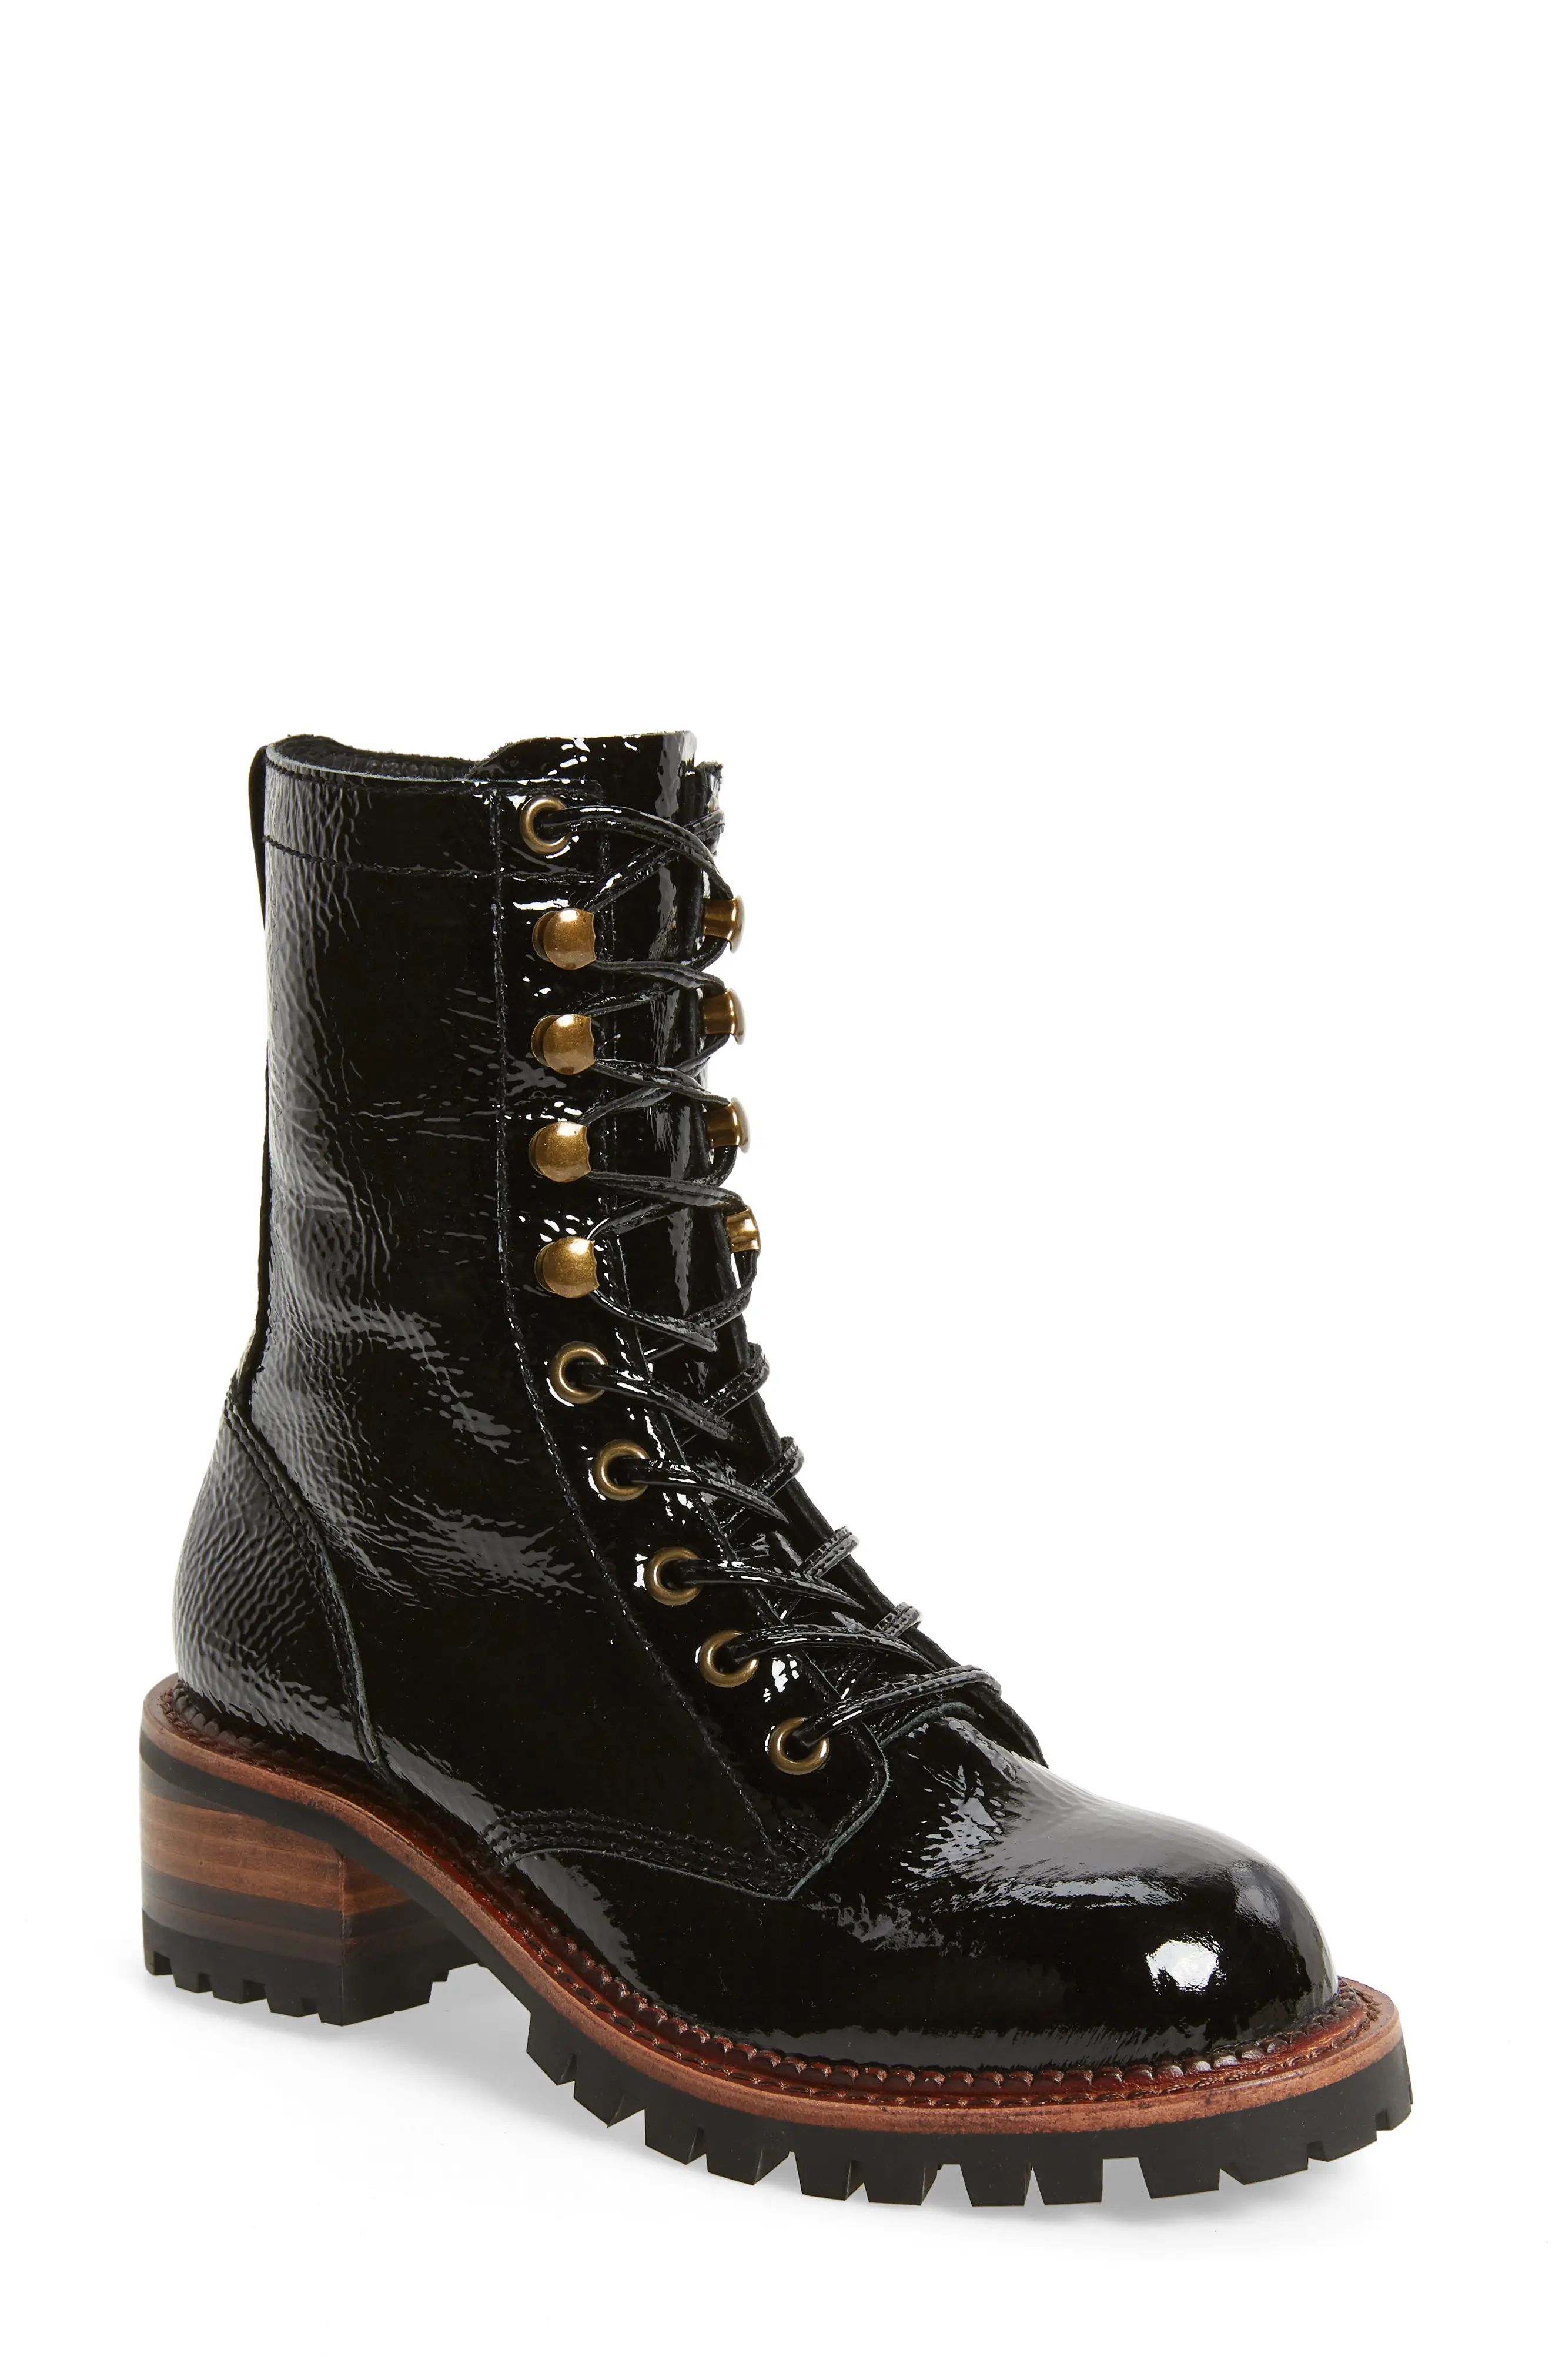 Women's Jeffrey Campbell Sycamore Patent Leather Boot, Size 7 M - Black | Nordstrom